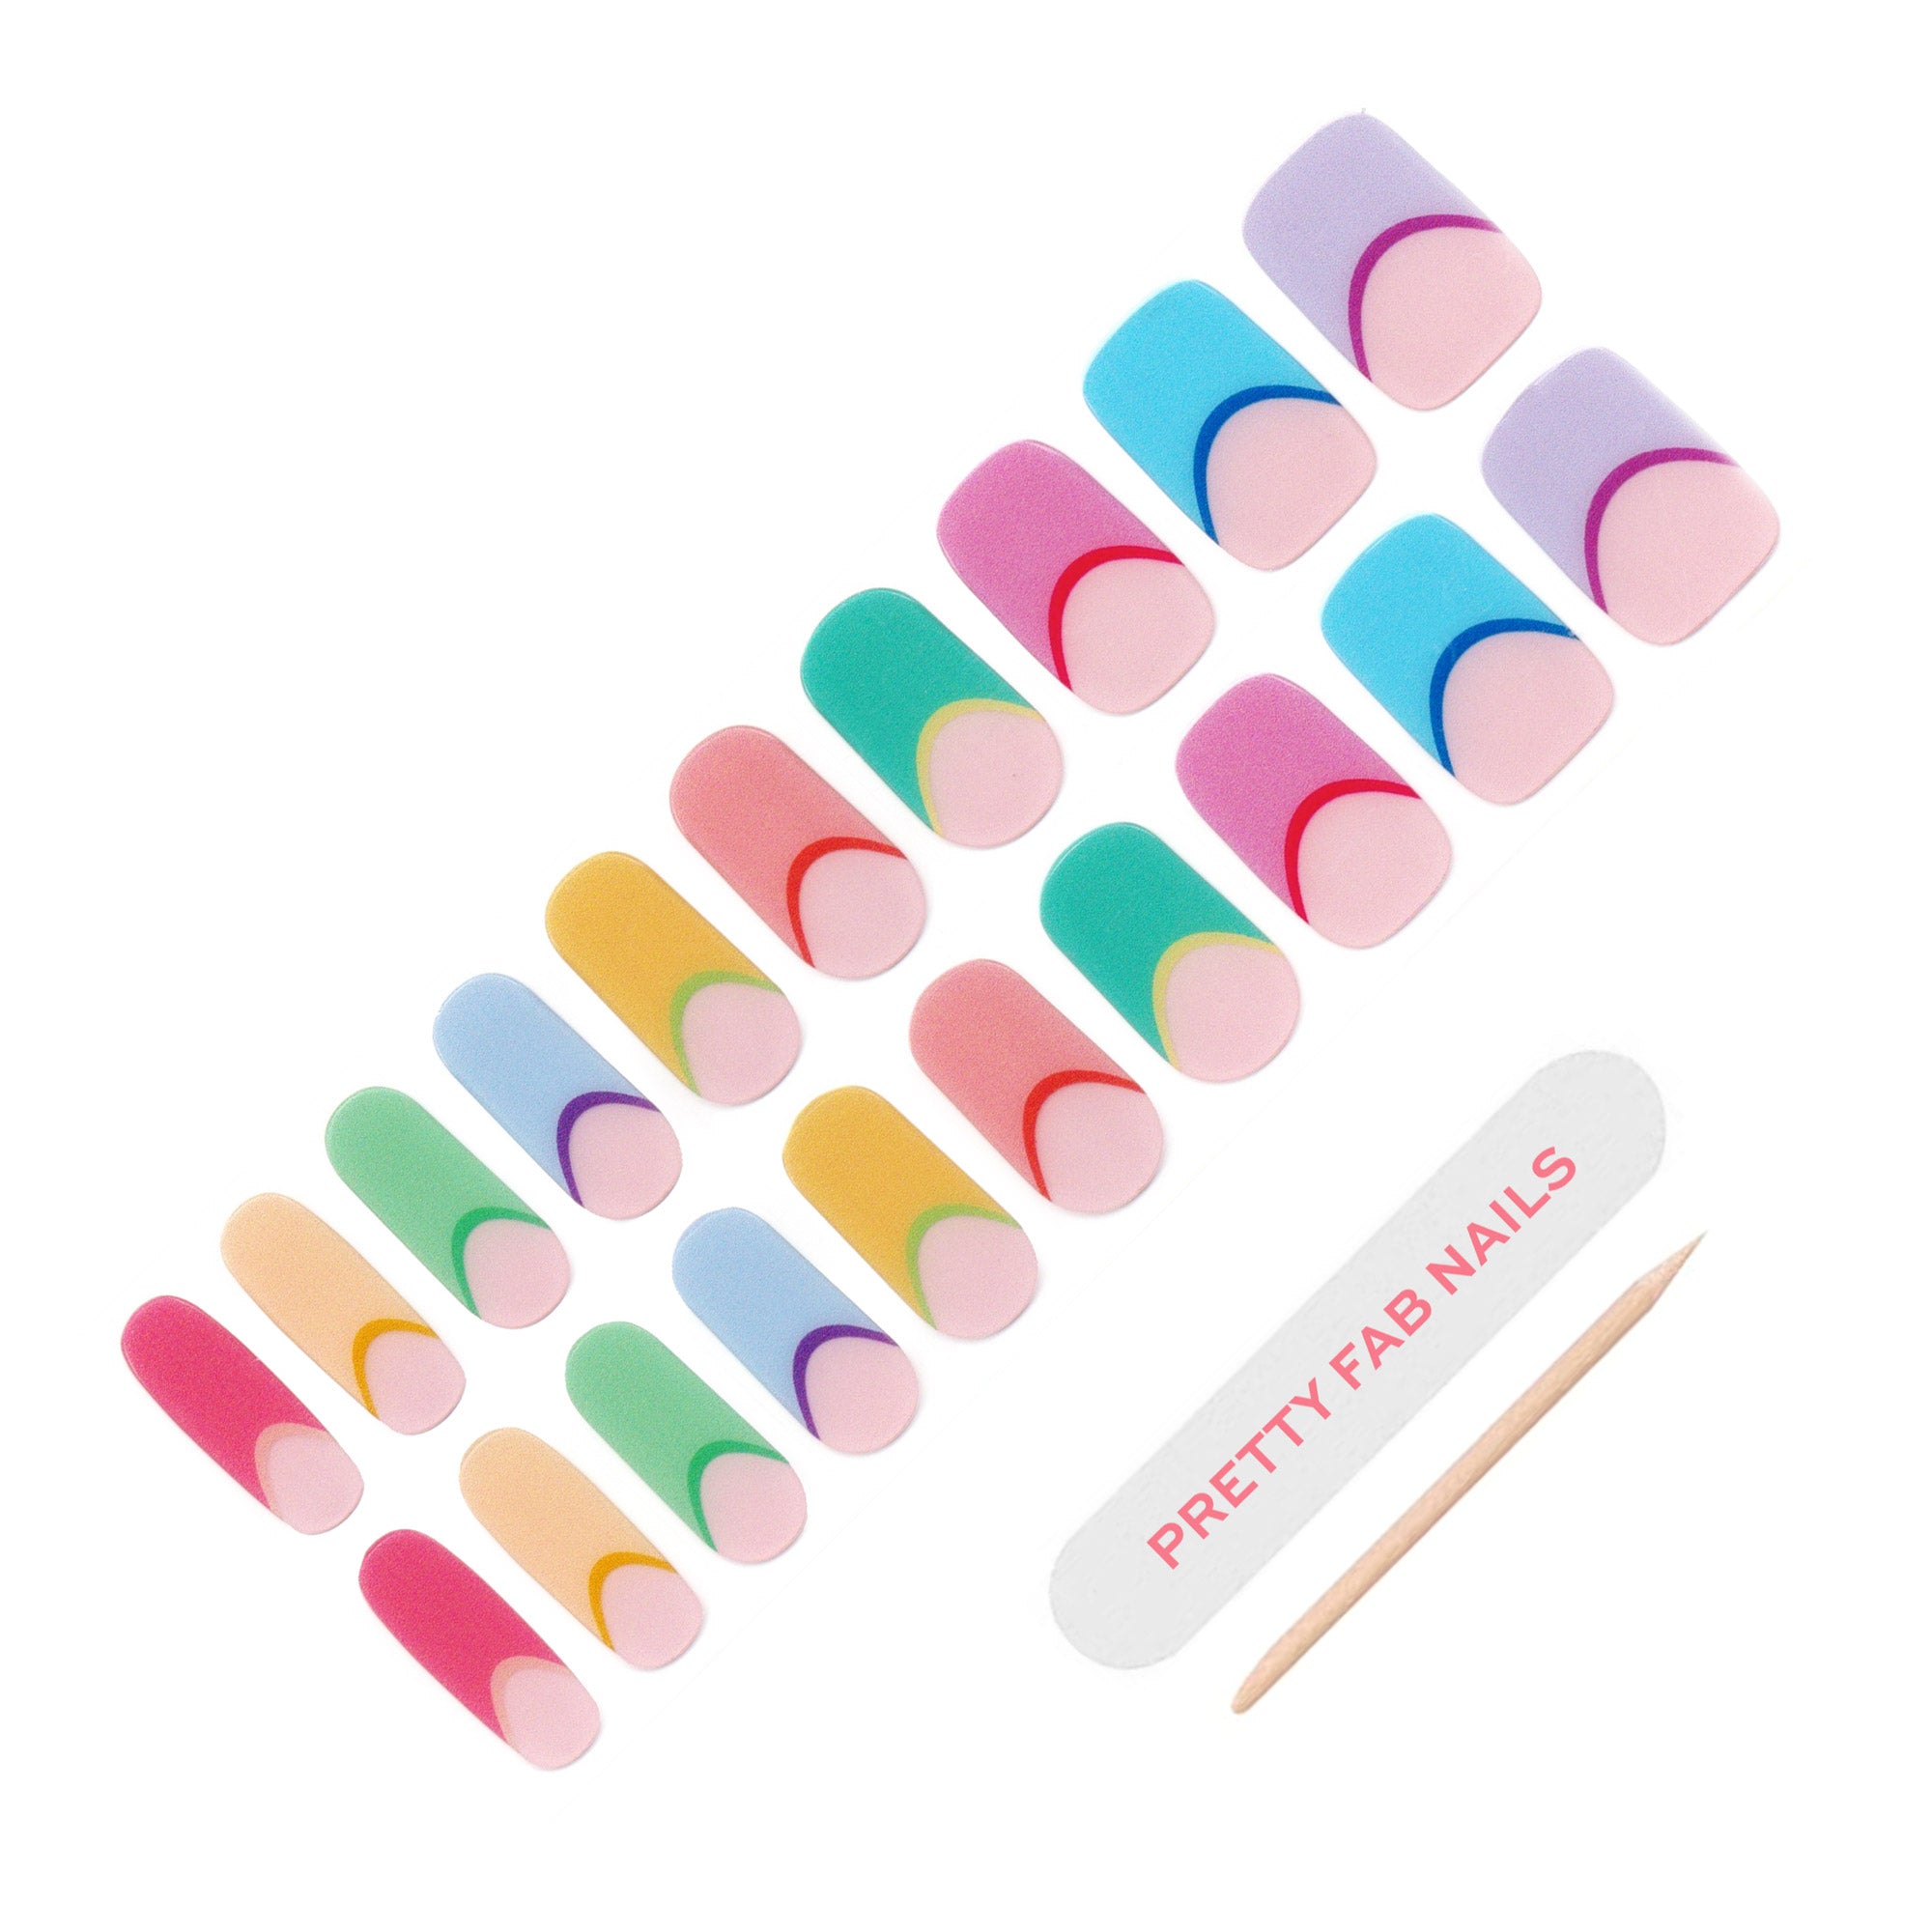 Candy French Semicured Gel Nail Wraps